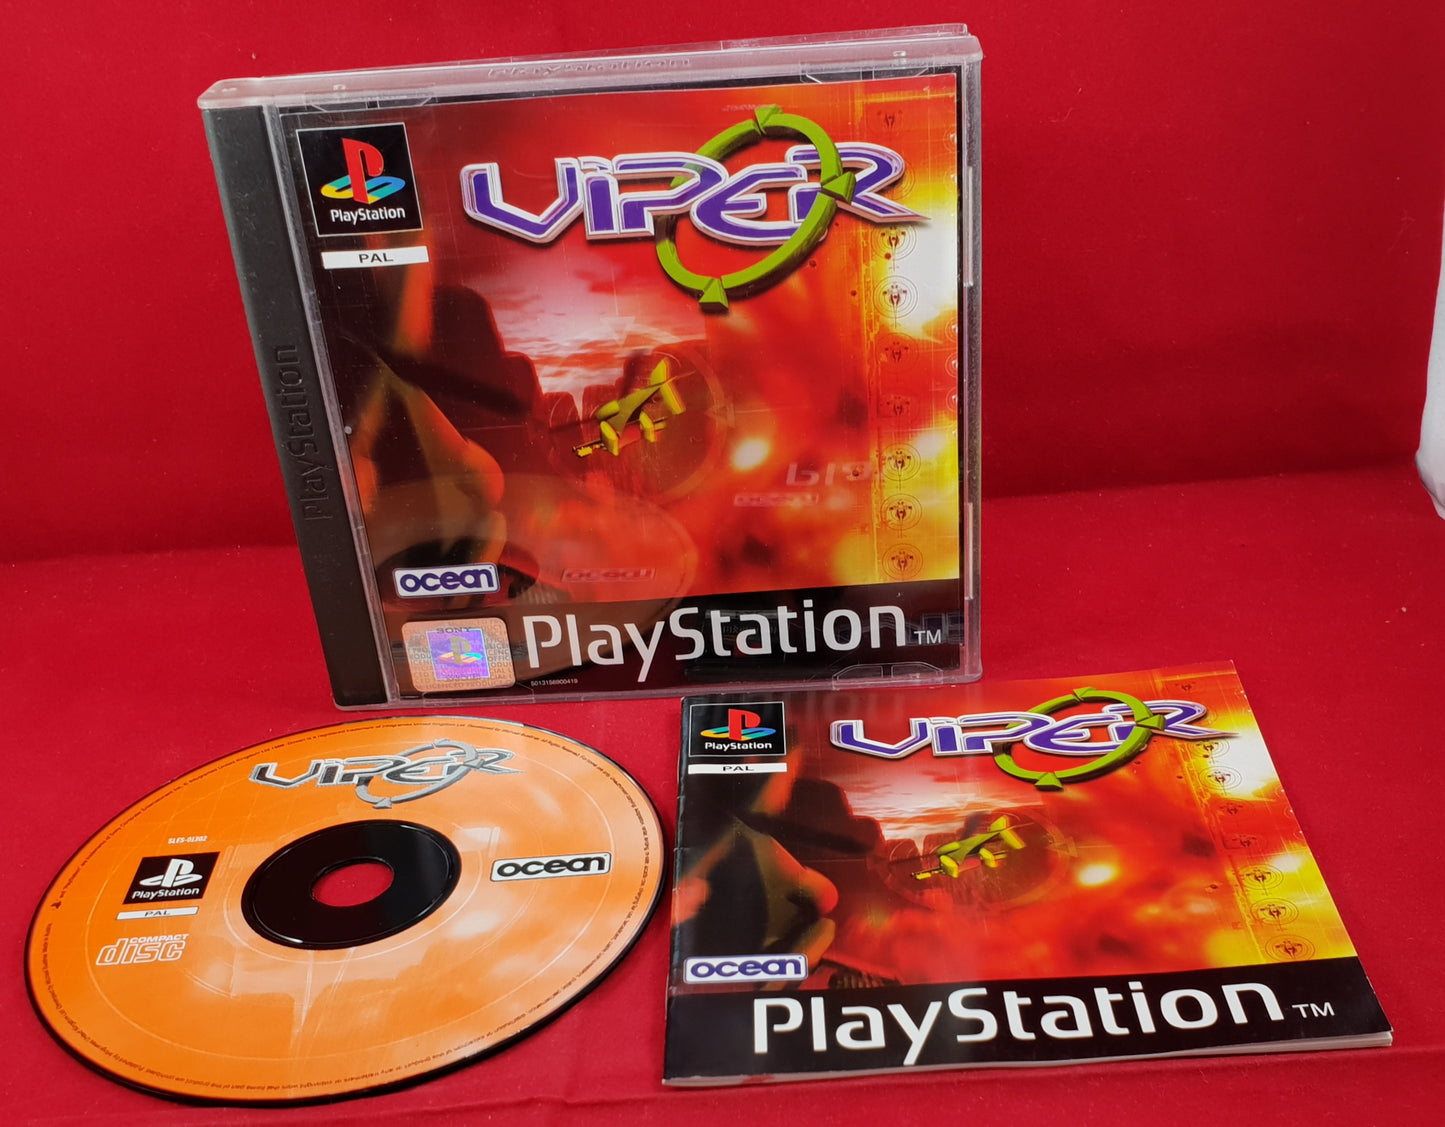 Viper Sony Playstation 1 (PS1) Game